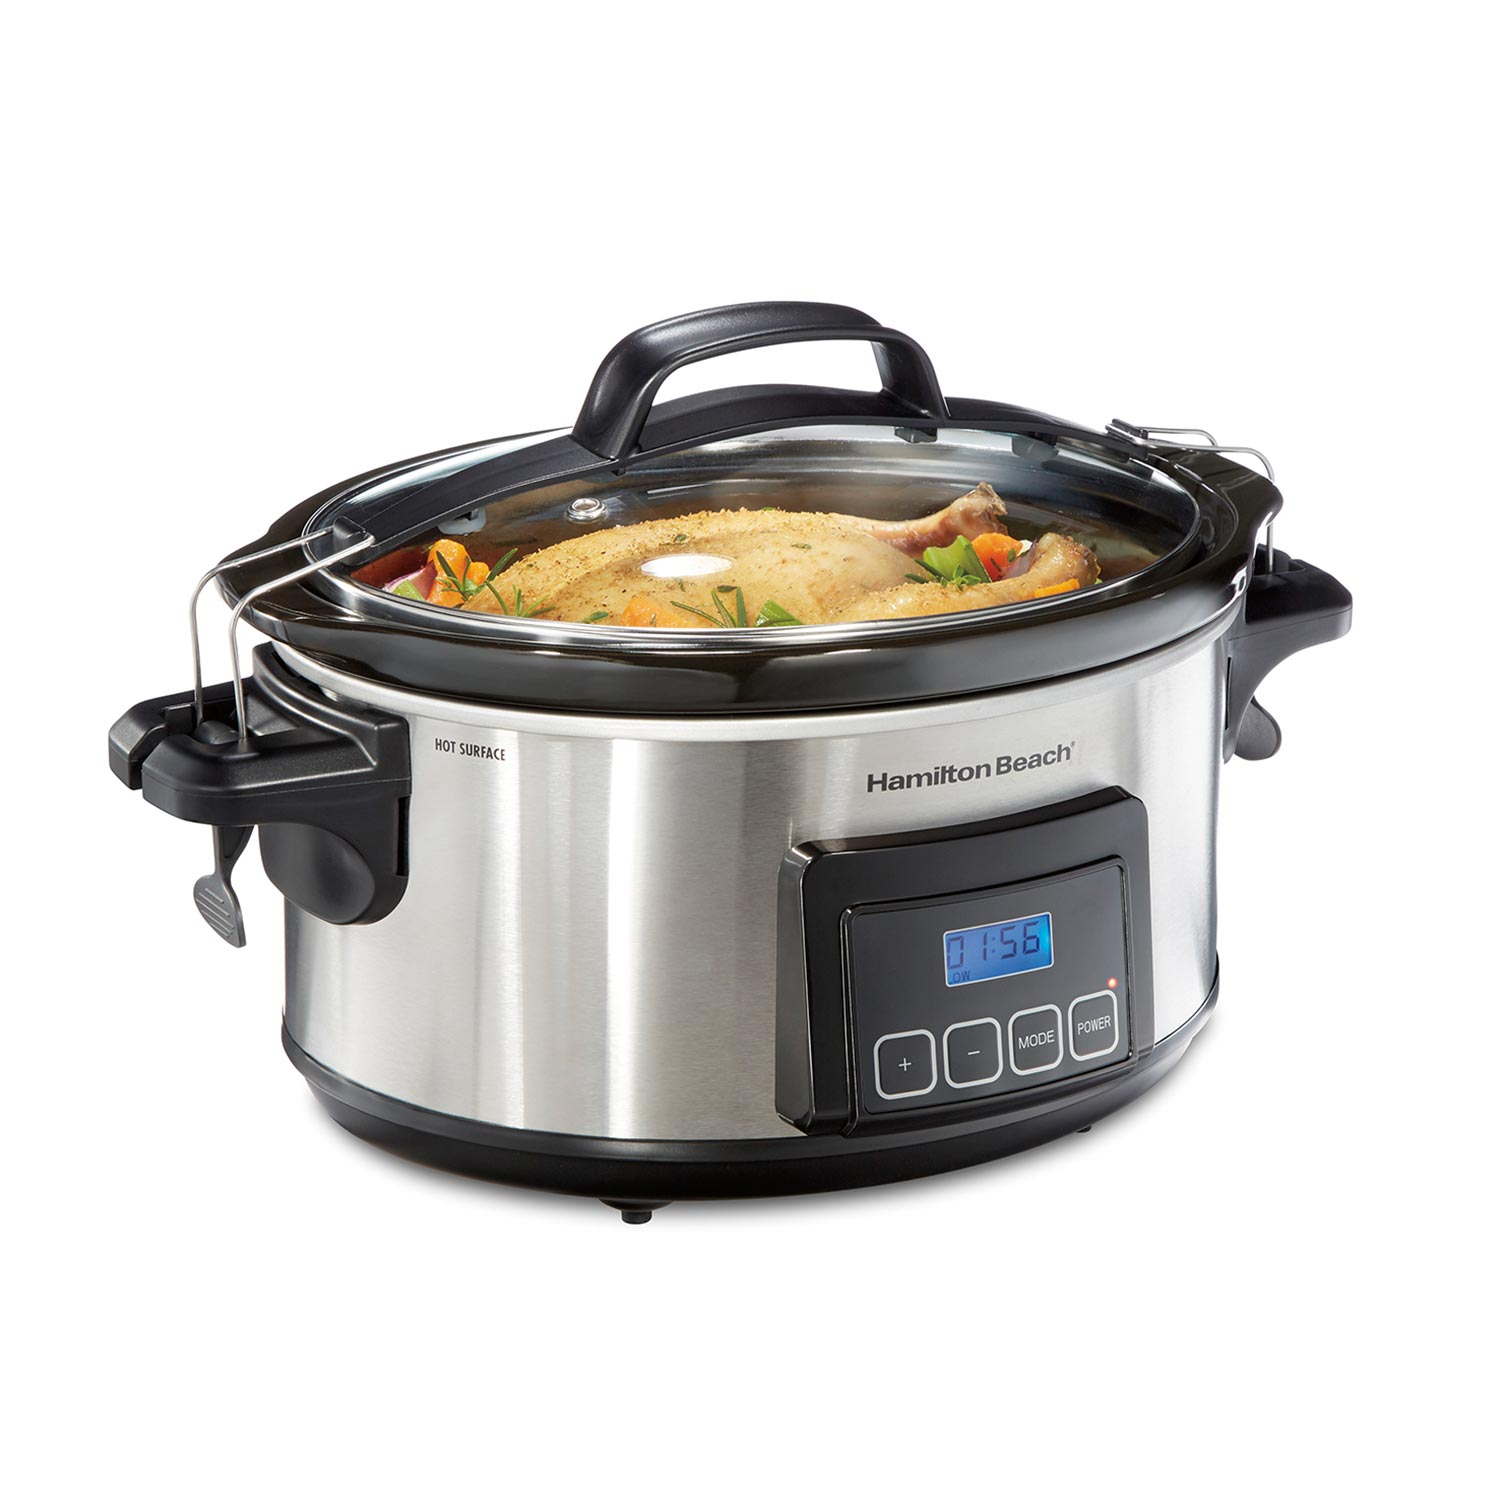 Programmable Stay or Go® 6 Qt. Slow Cooker, Stainless Steel (33561)